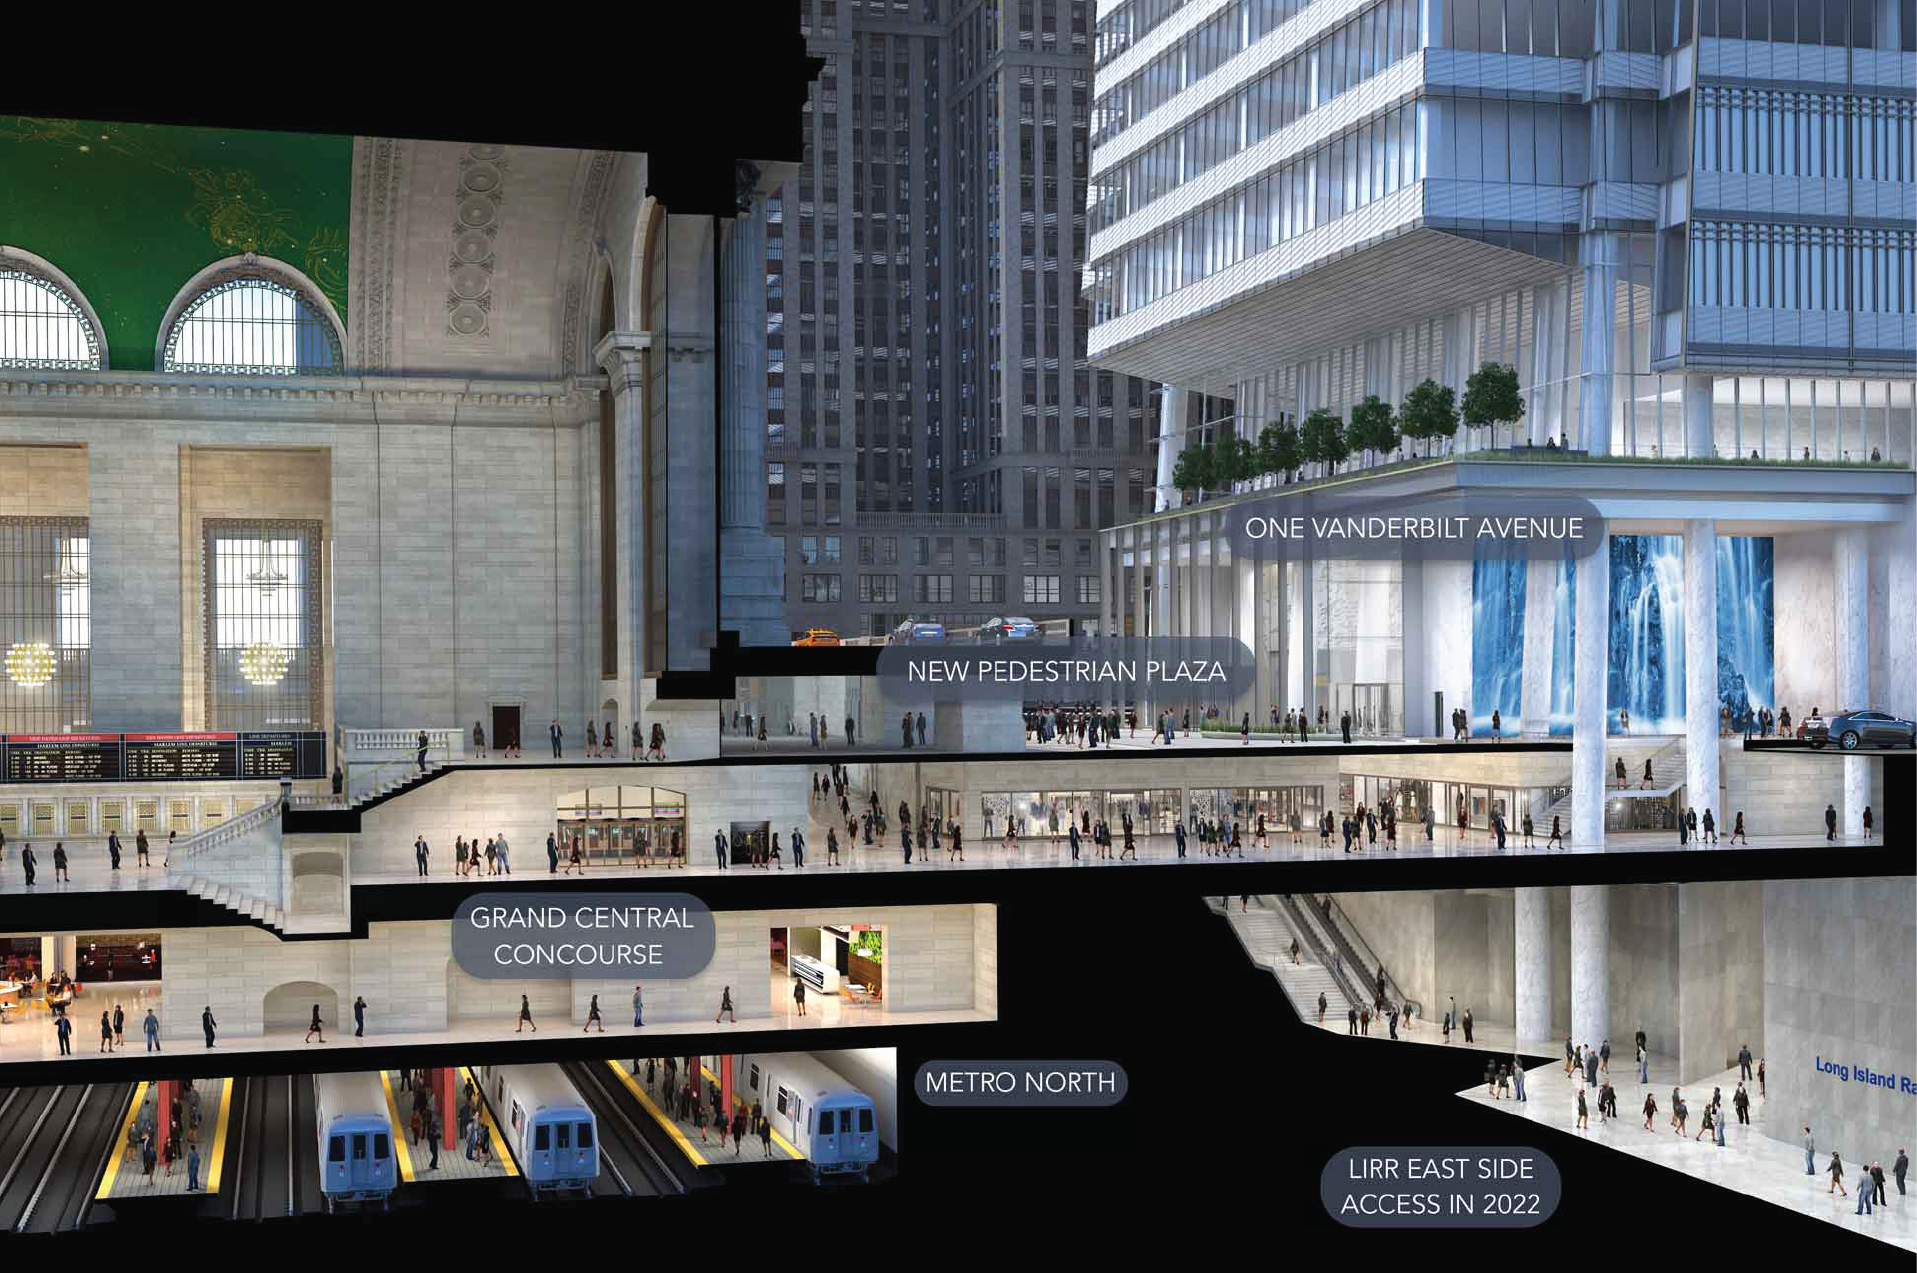 Section cut rendering showing the concourse connecting One Vanderbilt to the subway, MNR, LIRR, and Grand Central Terminal